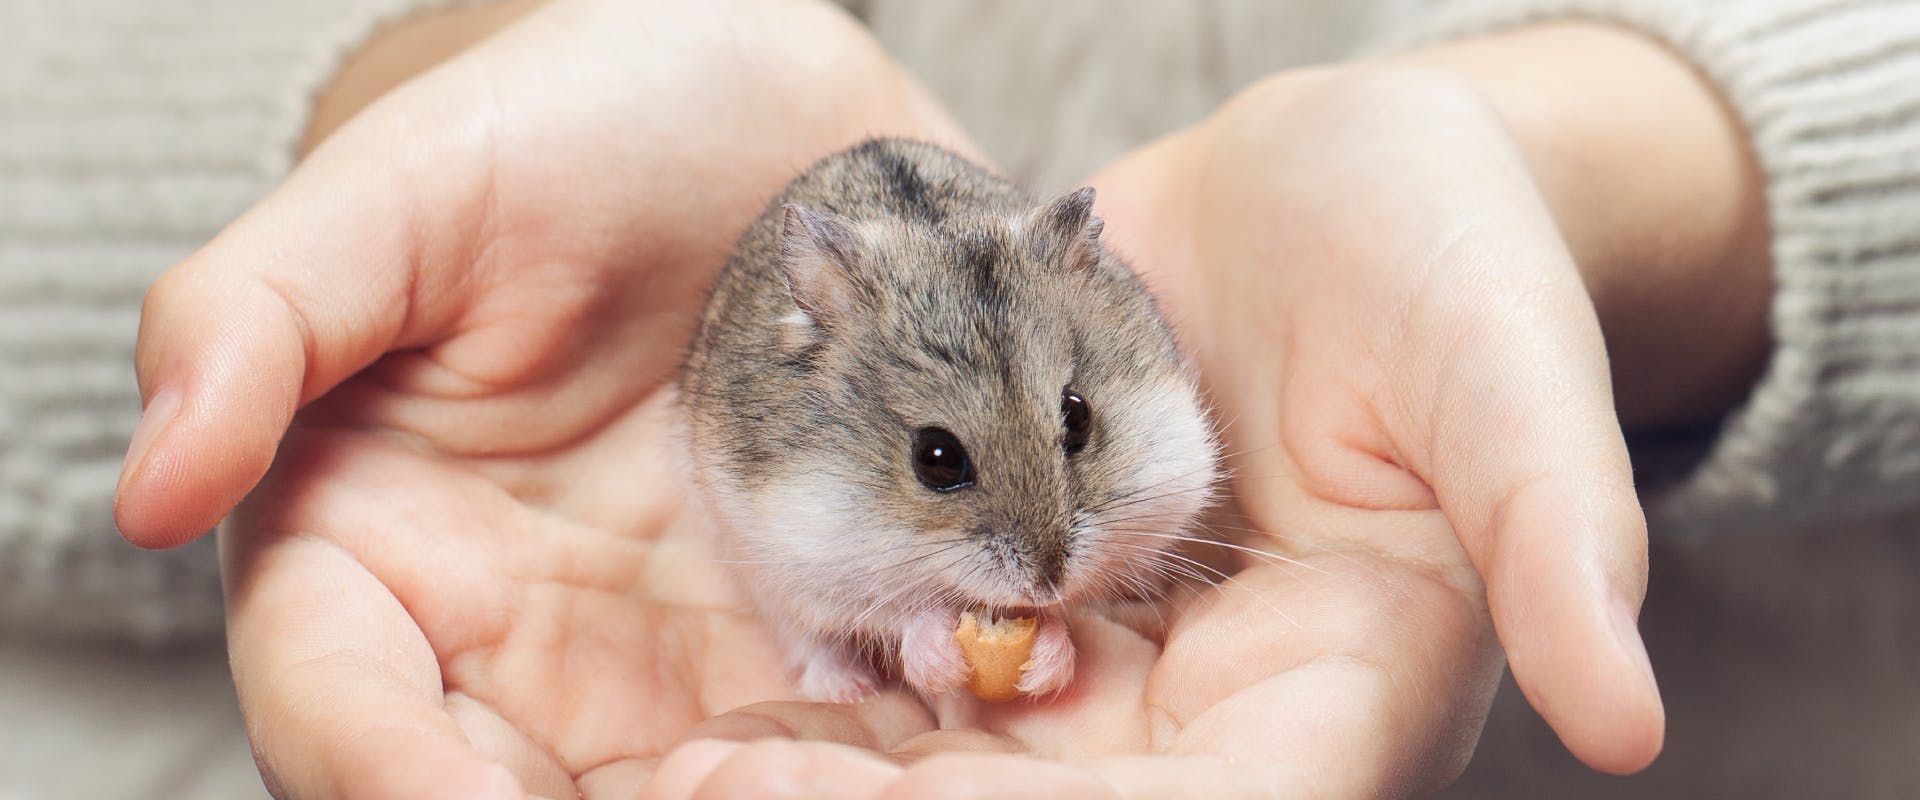 a gray hamster sitting in the cupped palms of a human while eating a nut